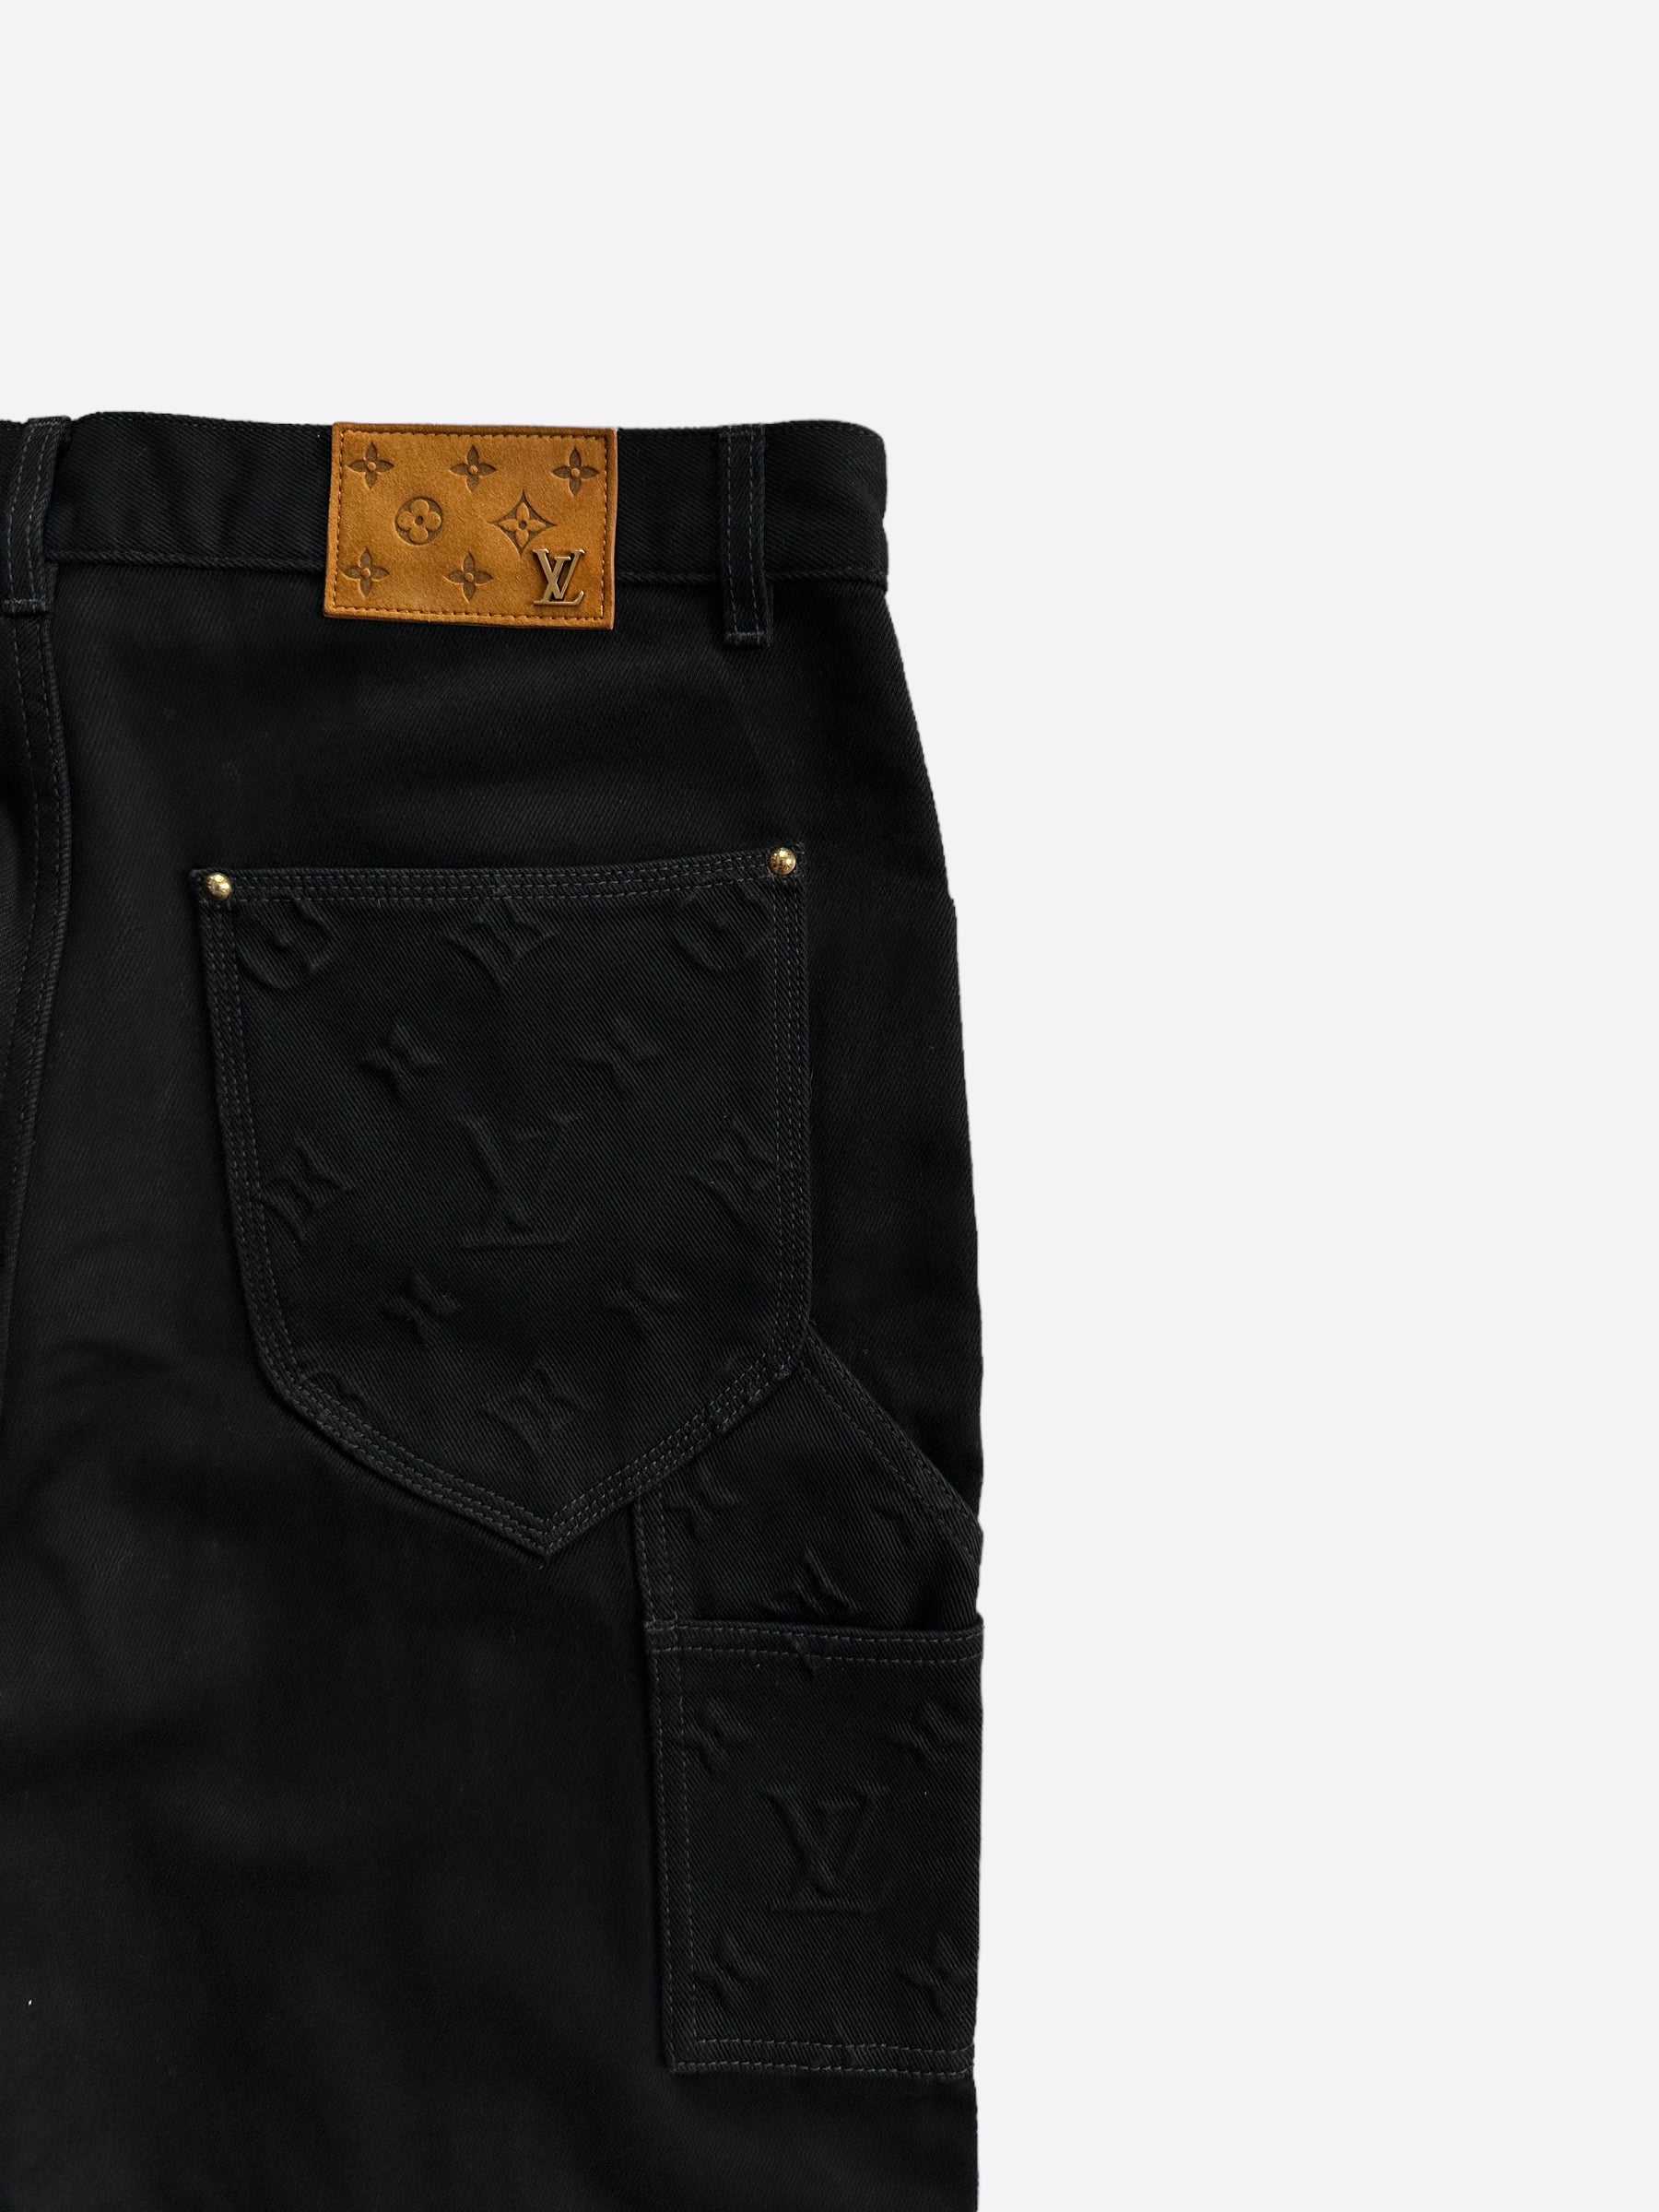 W2C Does anyone know where to find this black lv carpenter pants